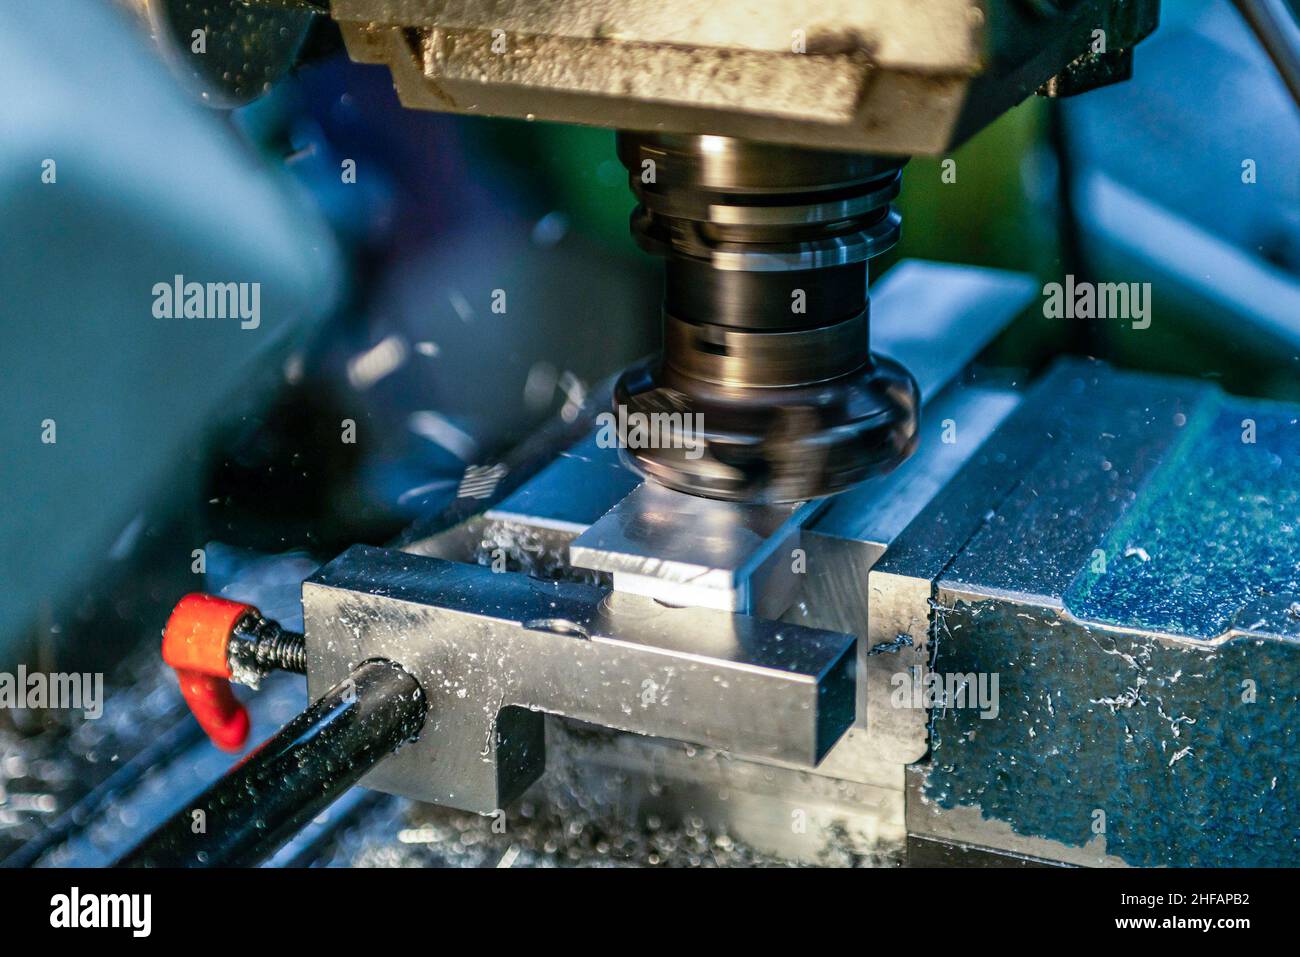 industrial metalworking cutting process by cnc milling cutter machine. Stock Photo